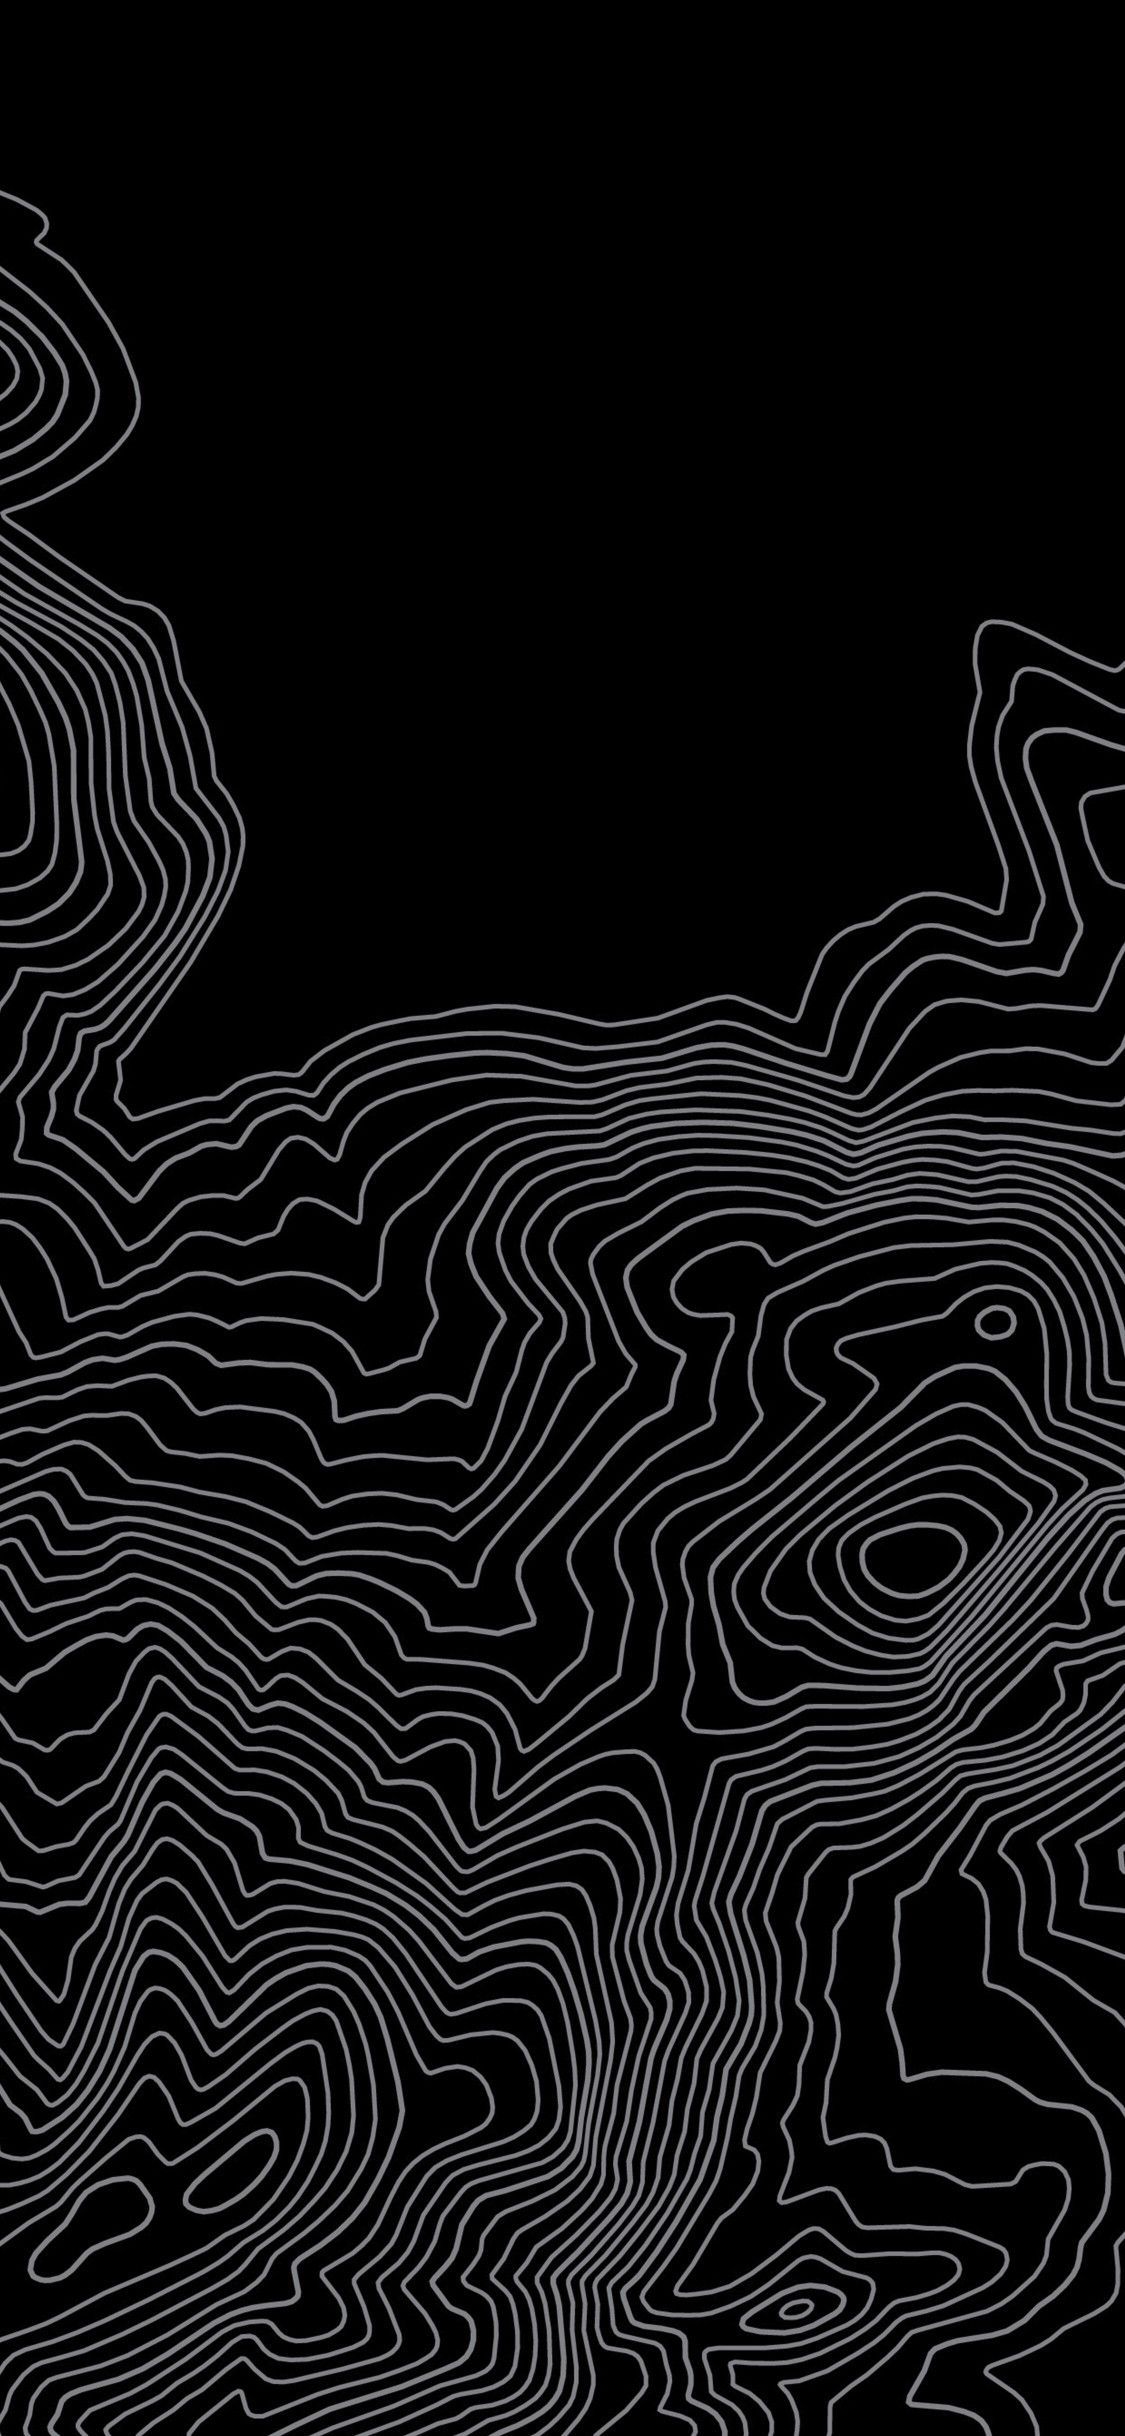 Topography. iPhone wallpaper fall, Texture graphic design, Graphic wallpaper